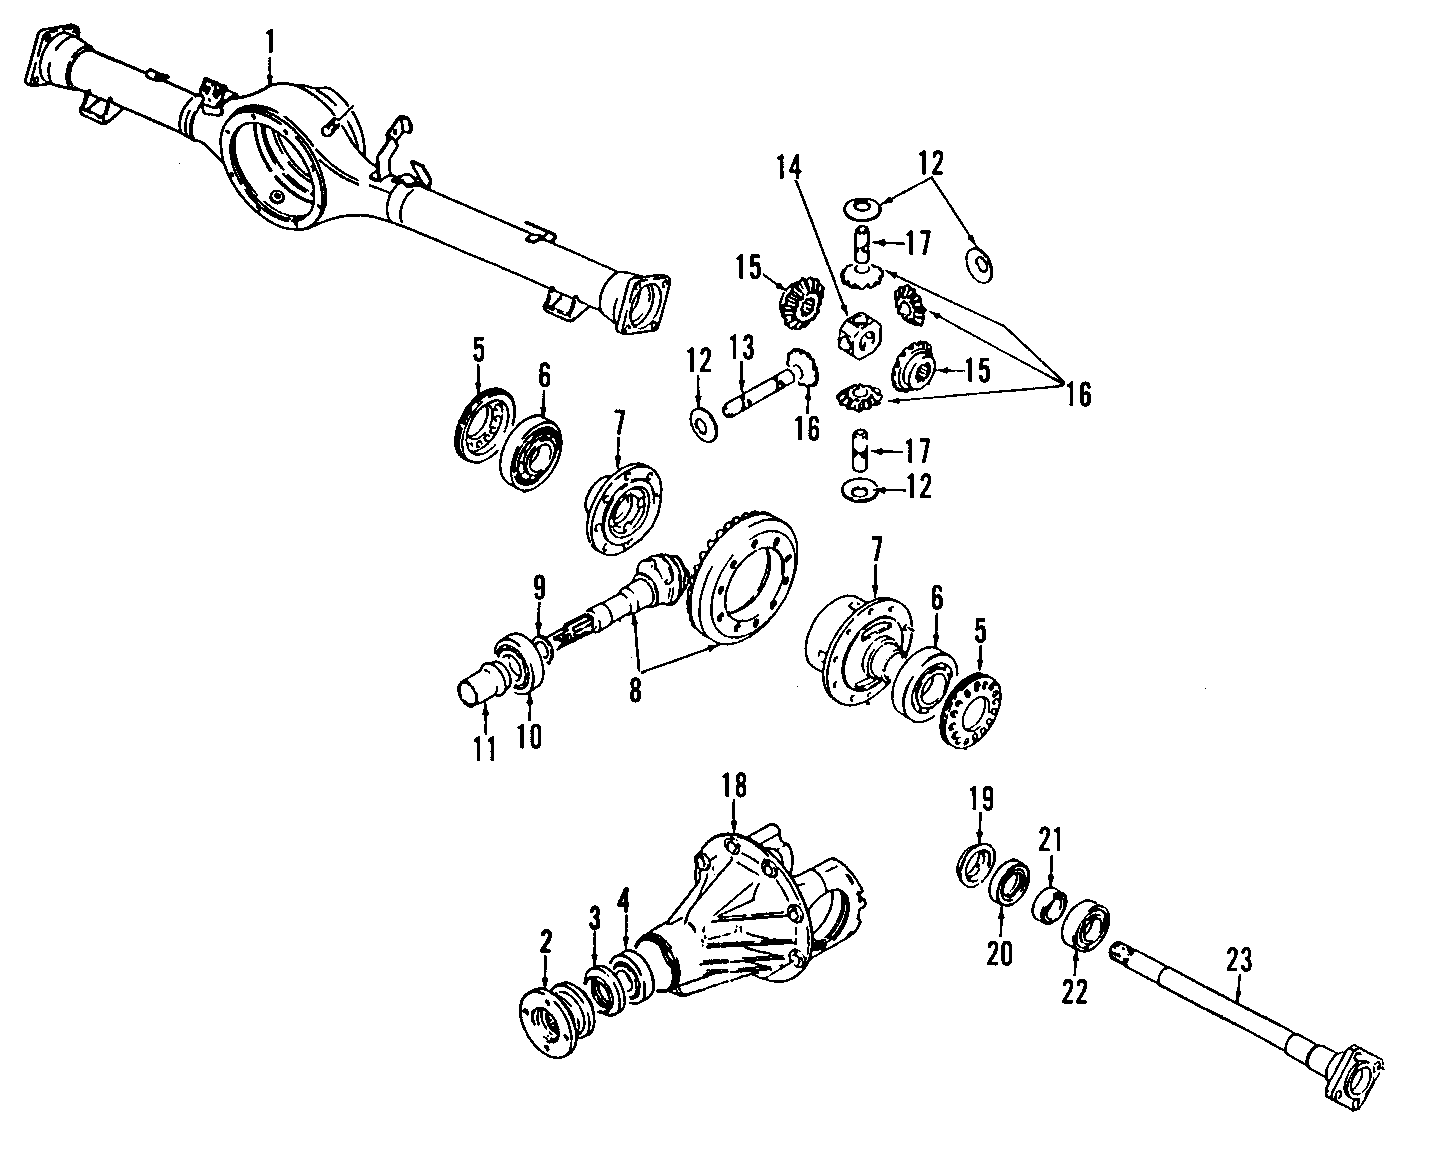 23REAR AXLE. DIFFERENTIAL. PROPELLER SHAFT.https://images.simplepart.com/images/parts/motor/fullsize/T011110.png